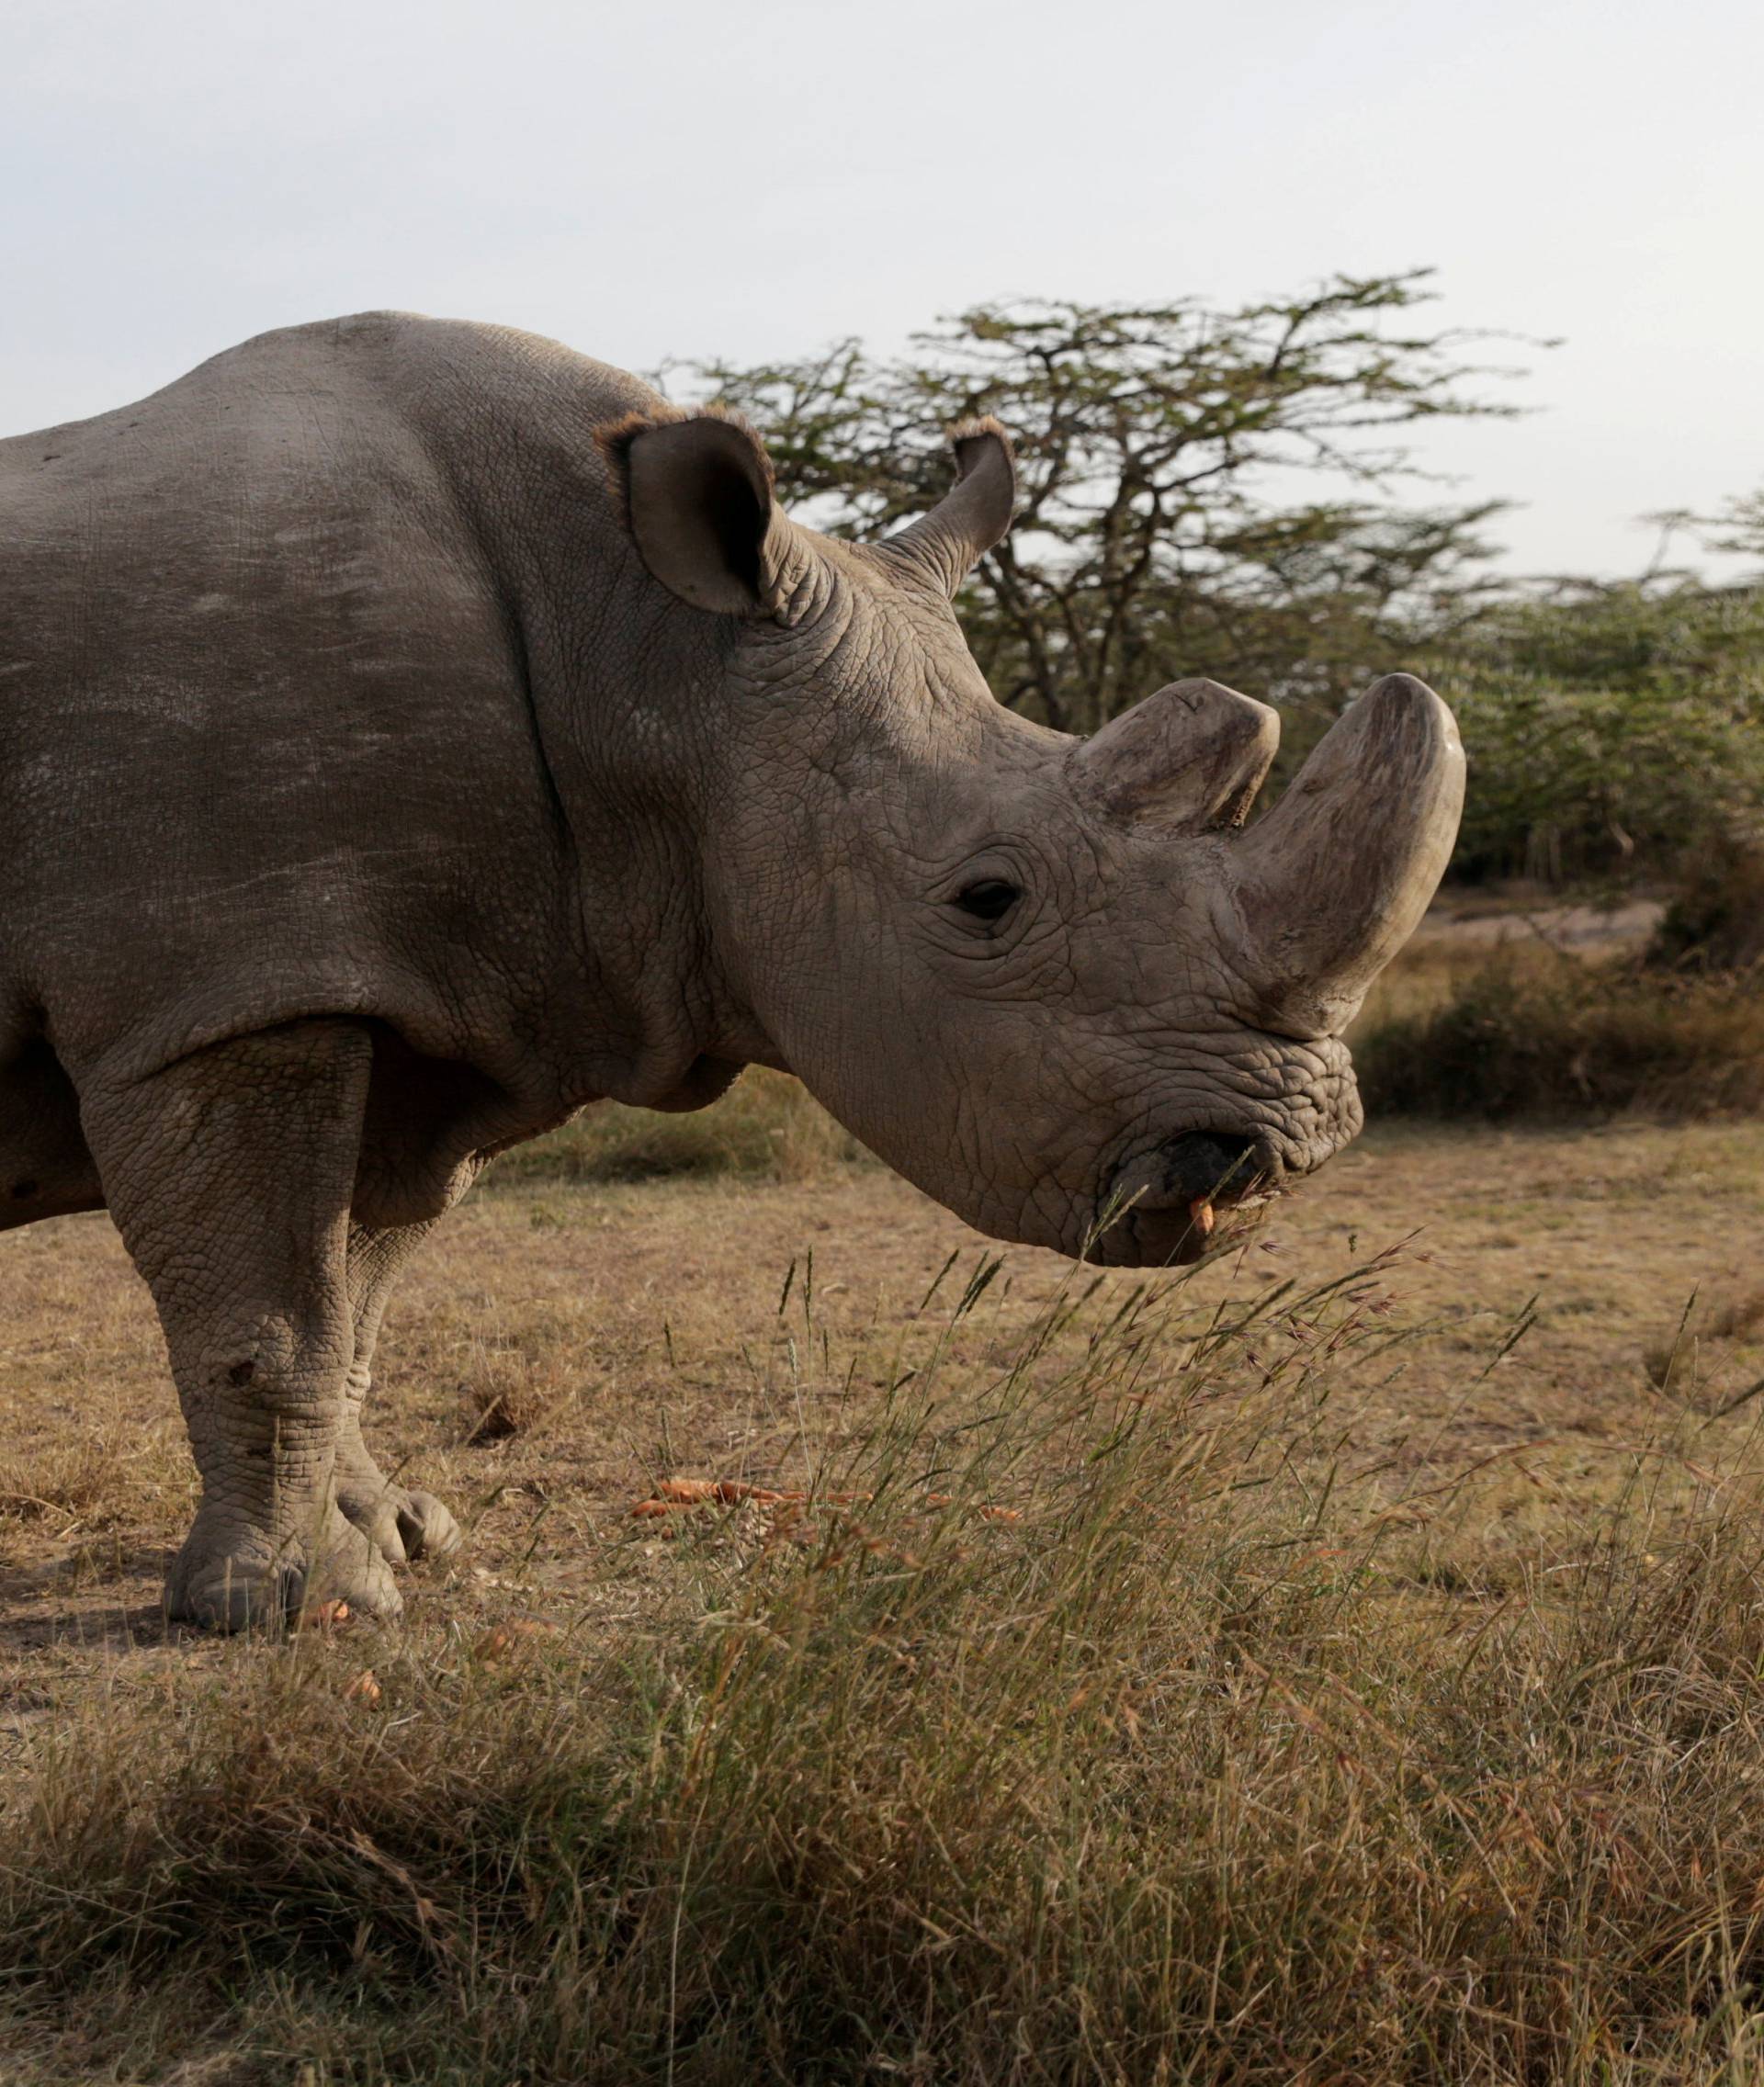 FILE PHOTO: The last surviving male northern white rhino named 'Sudan' is seen at the Ol Pejeta Conservancy in Laikipia